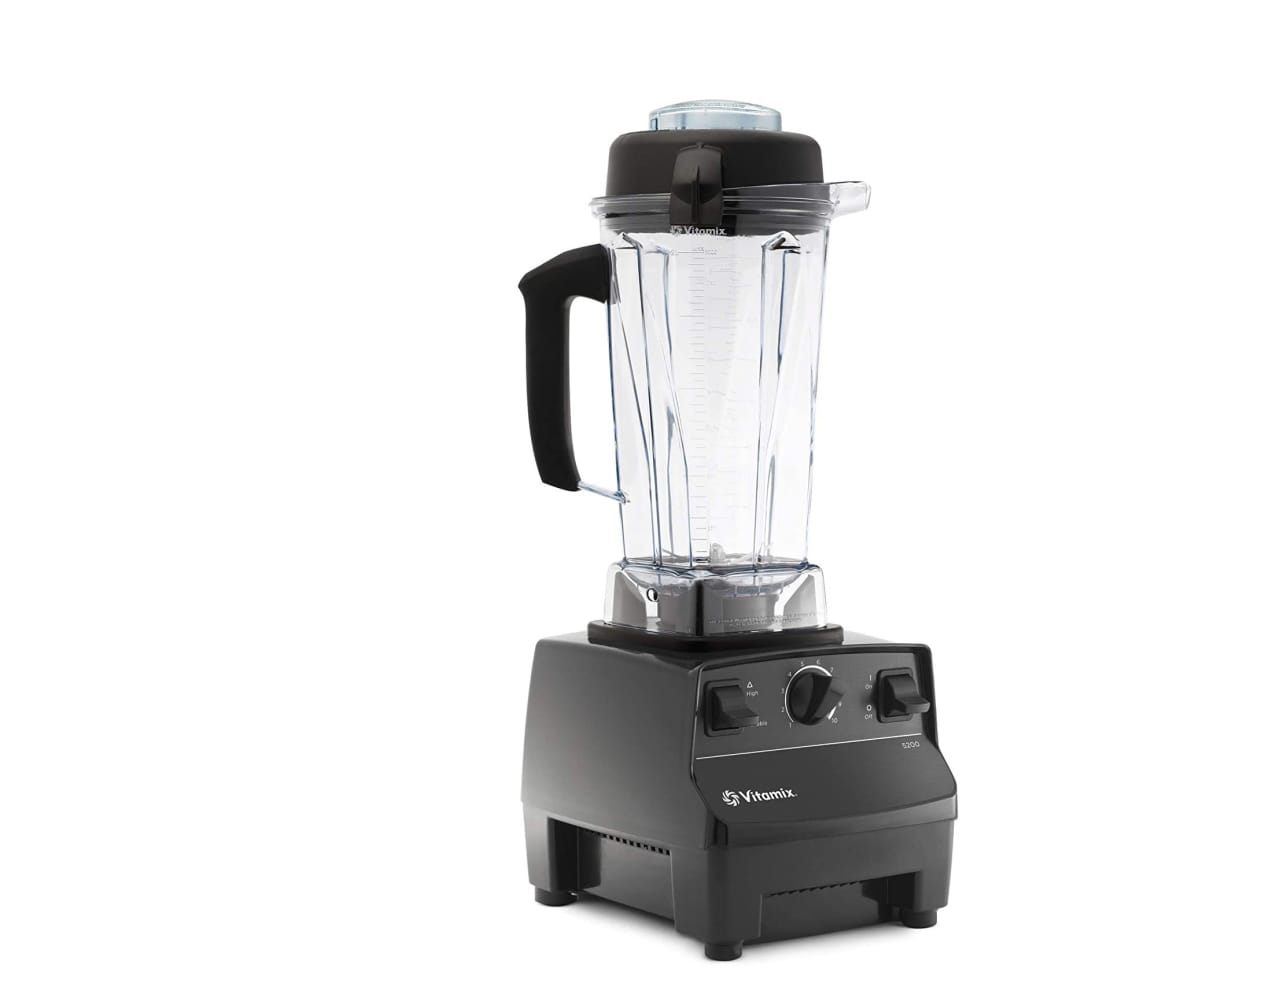  Professional Blender for Shakes and Smoothies, Nut Butters,  Soups, Dips, Hummus, Milks - 9-Speed - Versatile Kitchen Appliance with 2  HP Motor - 64oz BPA-Free Tritan Carafe: Home & Kitchen